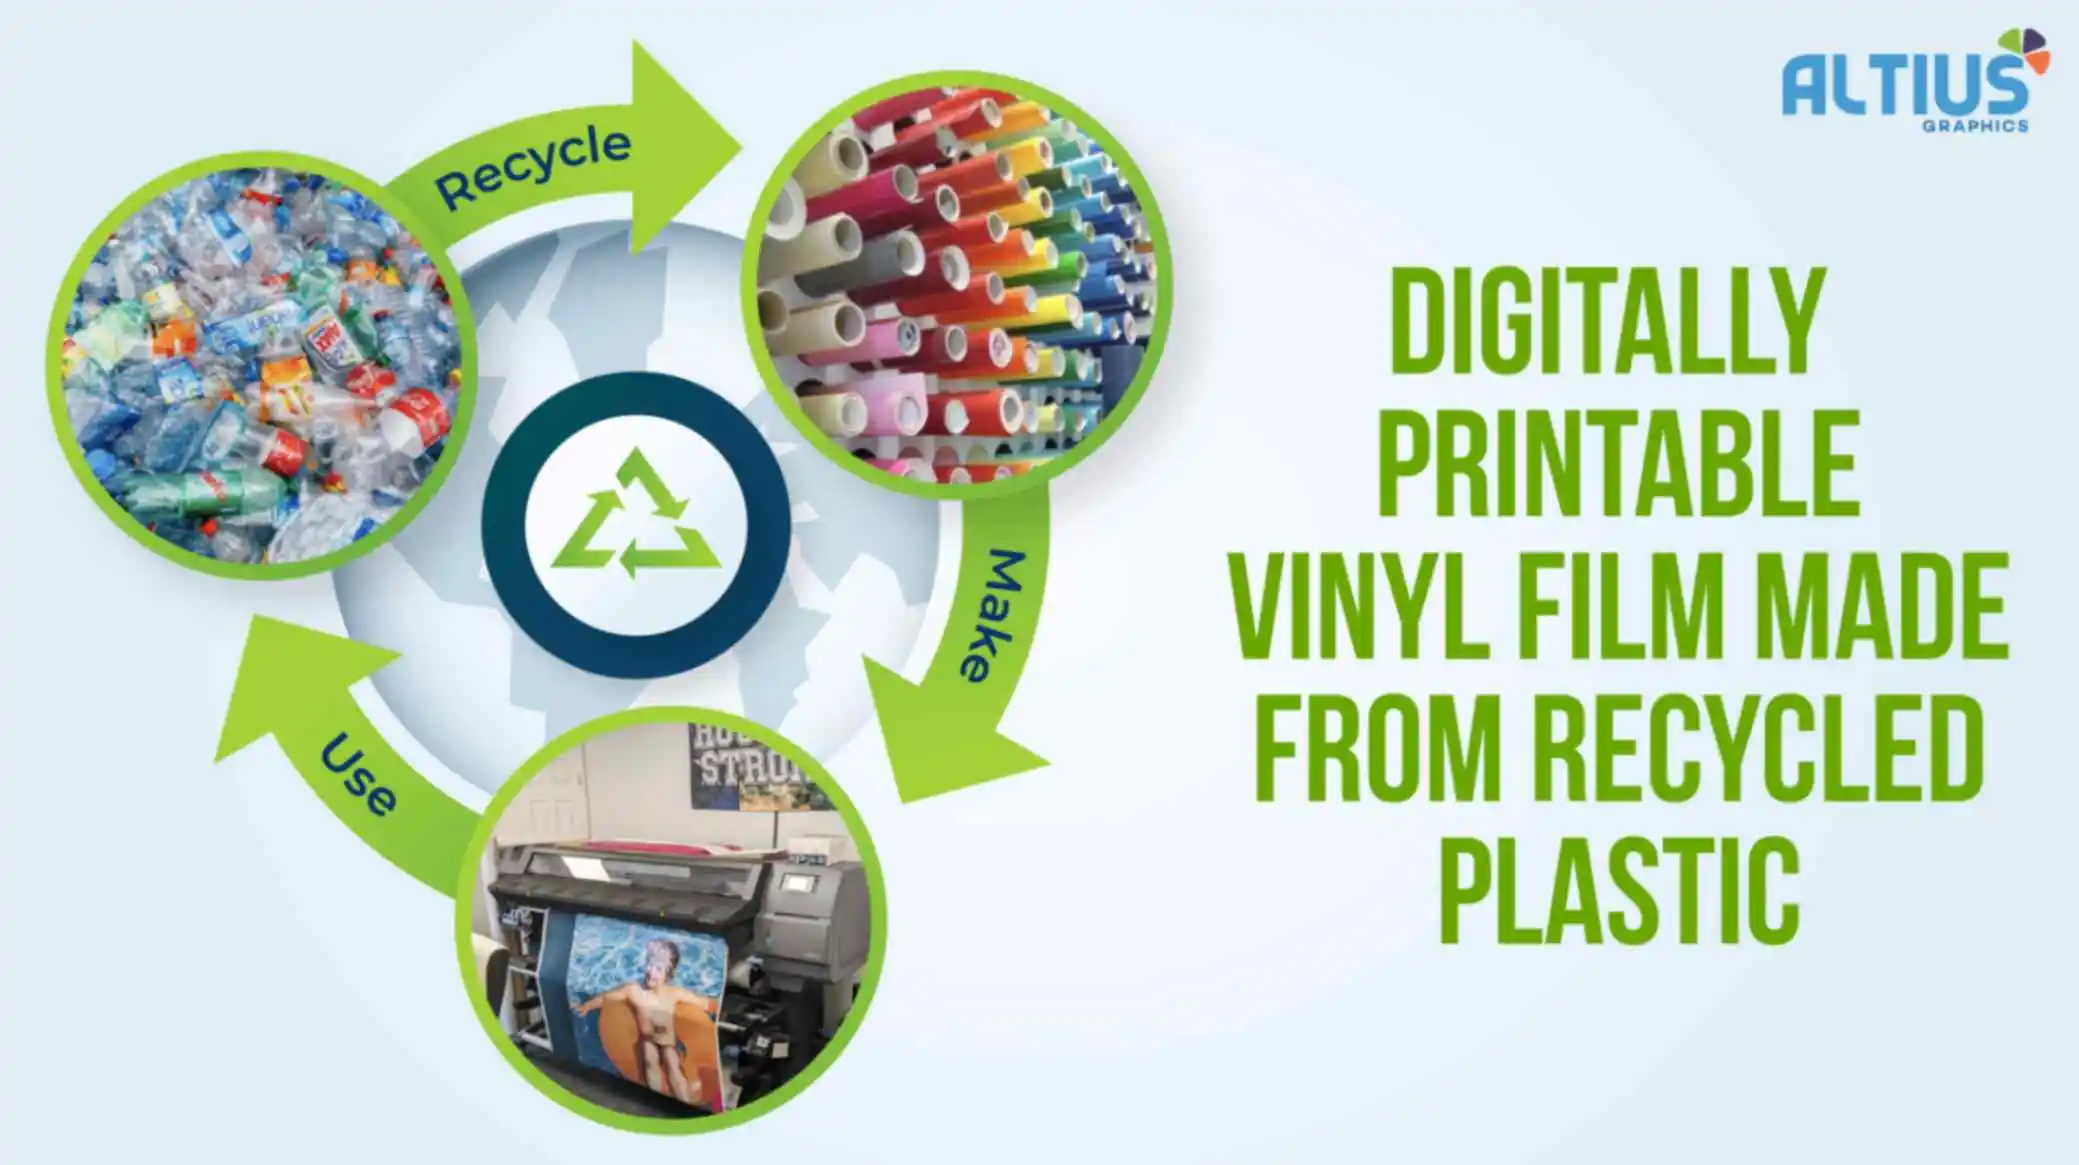 digitally-printable-vinyl-film-made-from-recycled-plastic